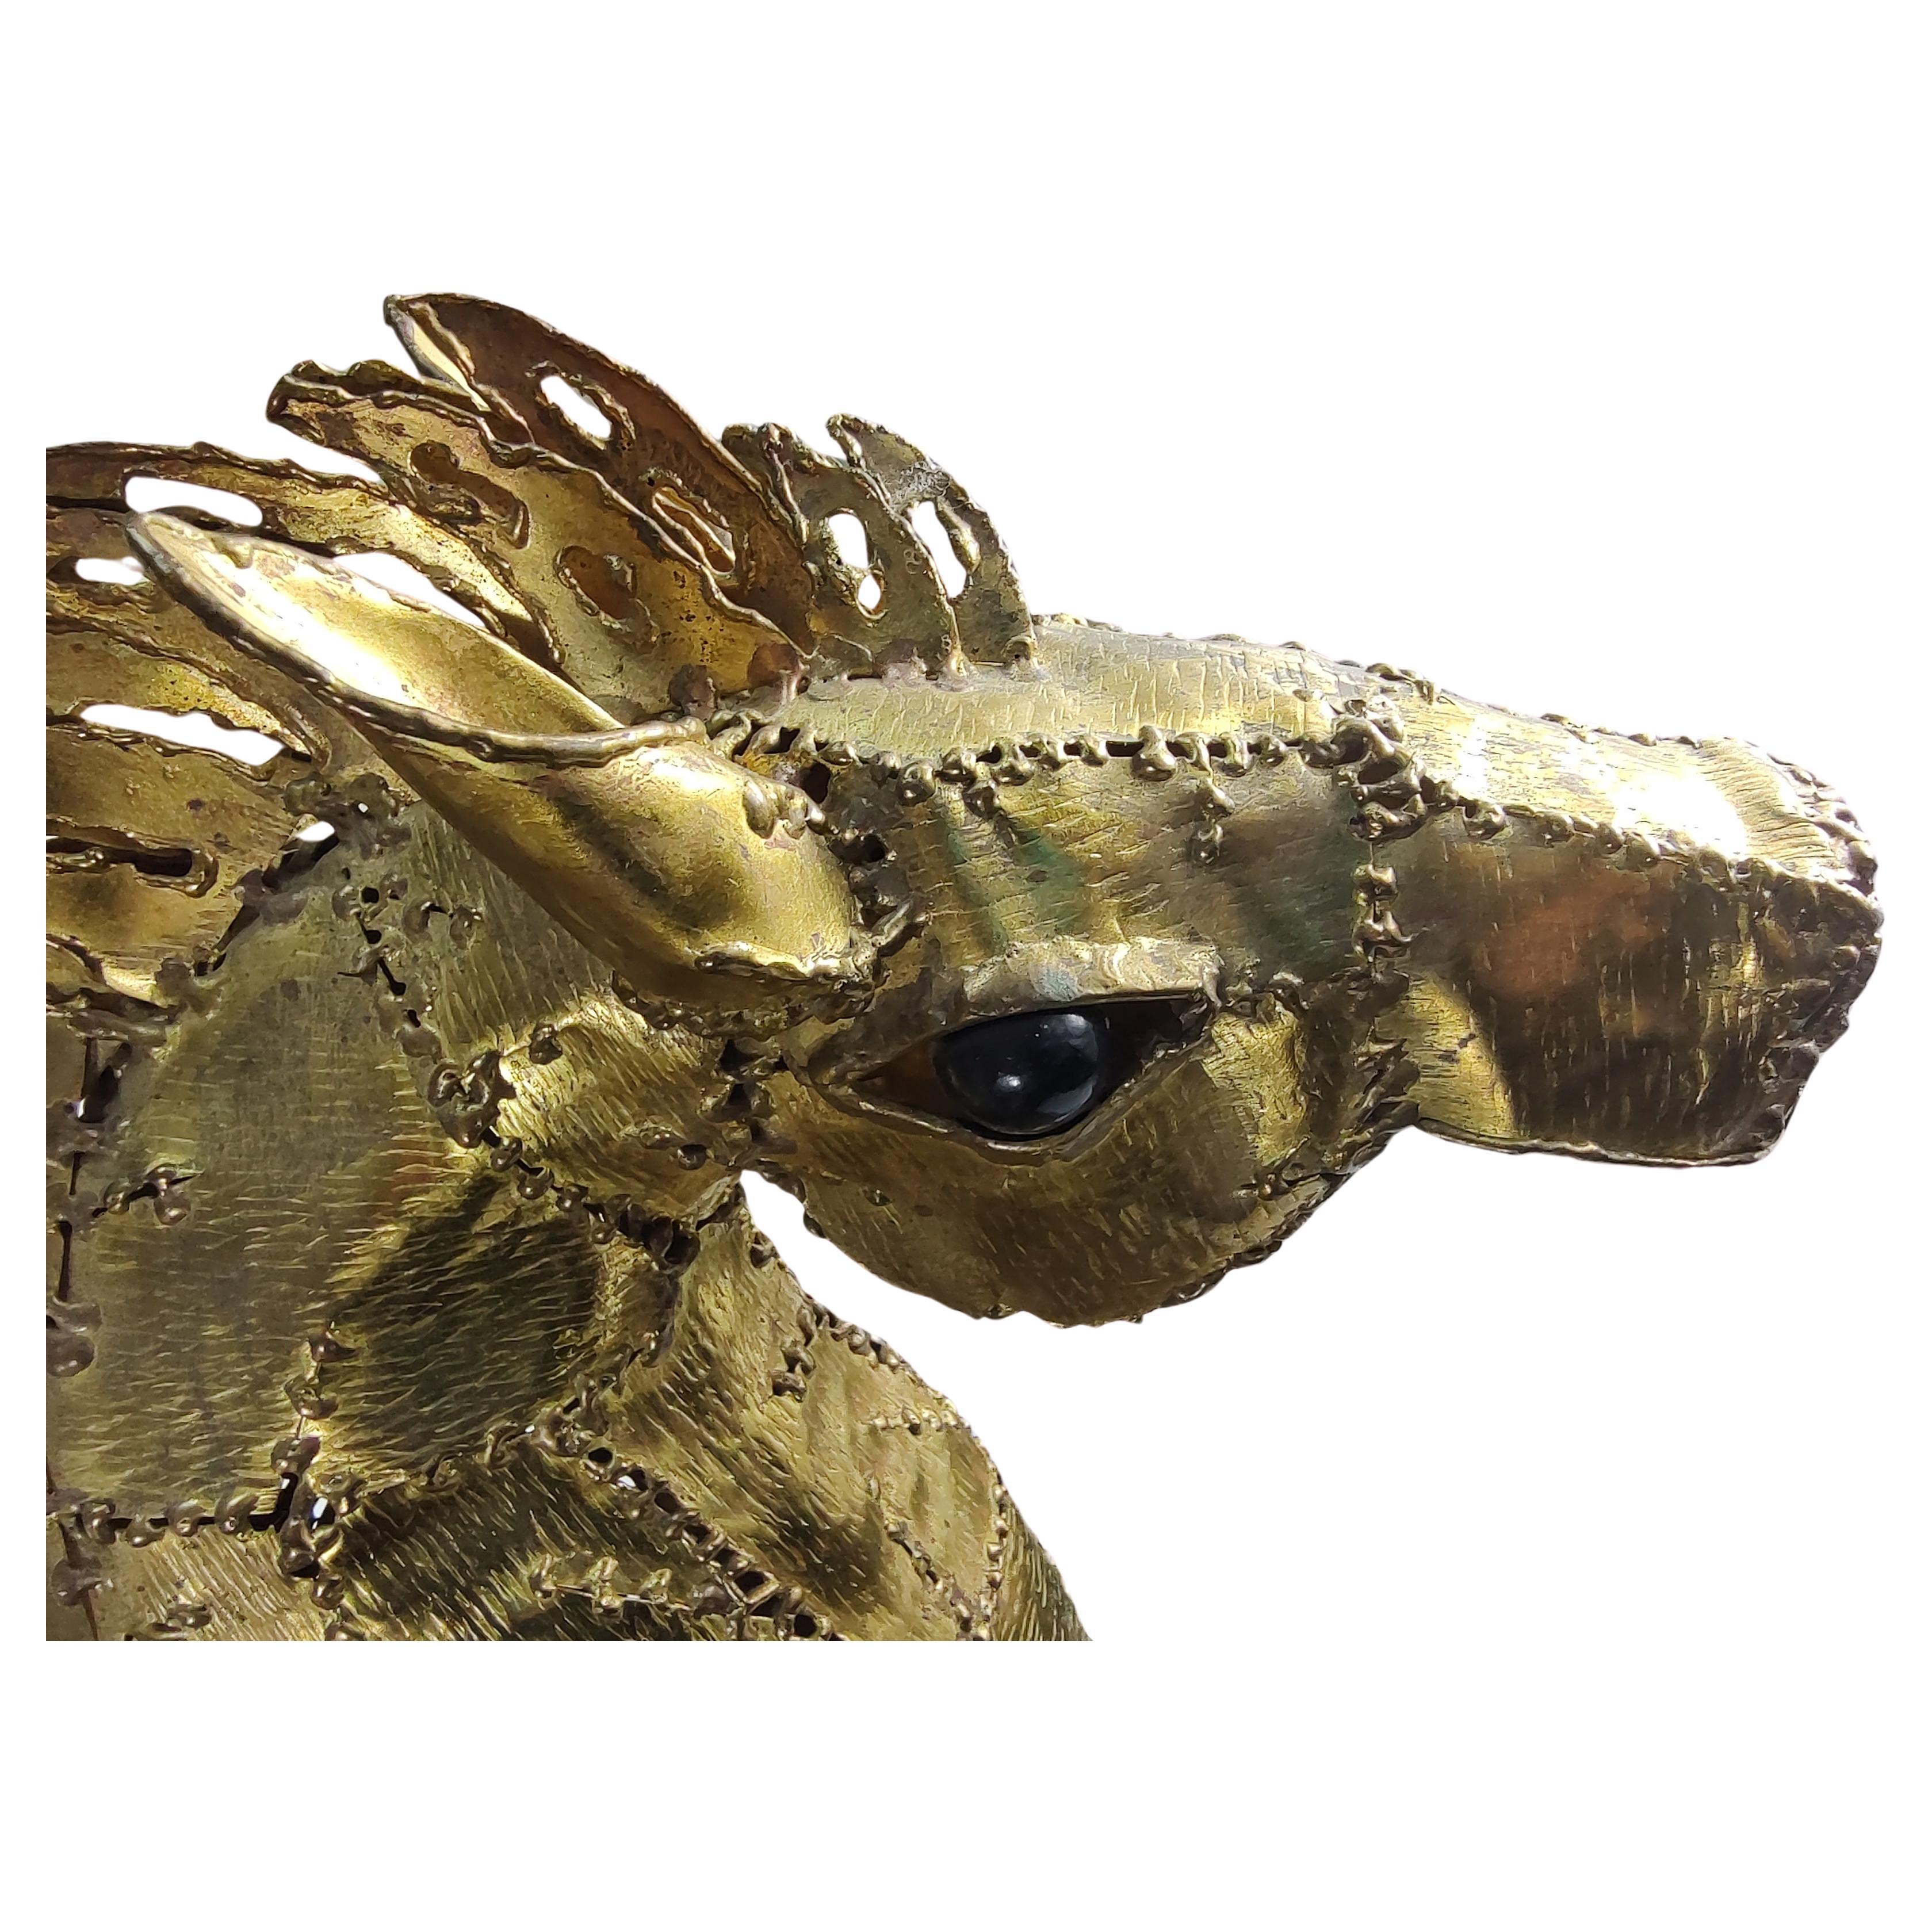 Large Mid Century Modern Sculptural Brass Horse by Luciano Bustamante 1965 For Sale 1